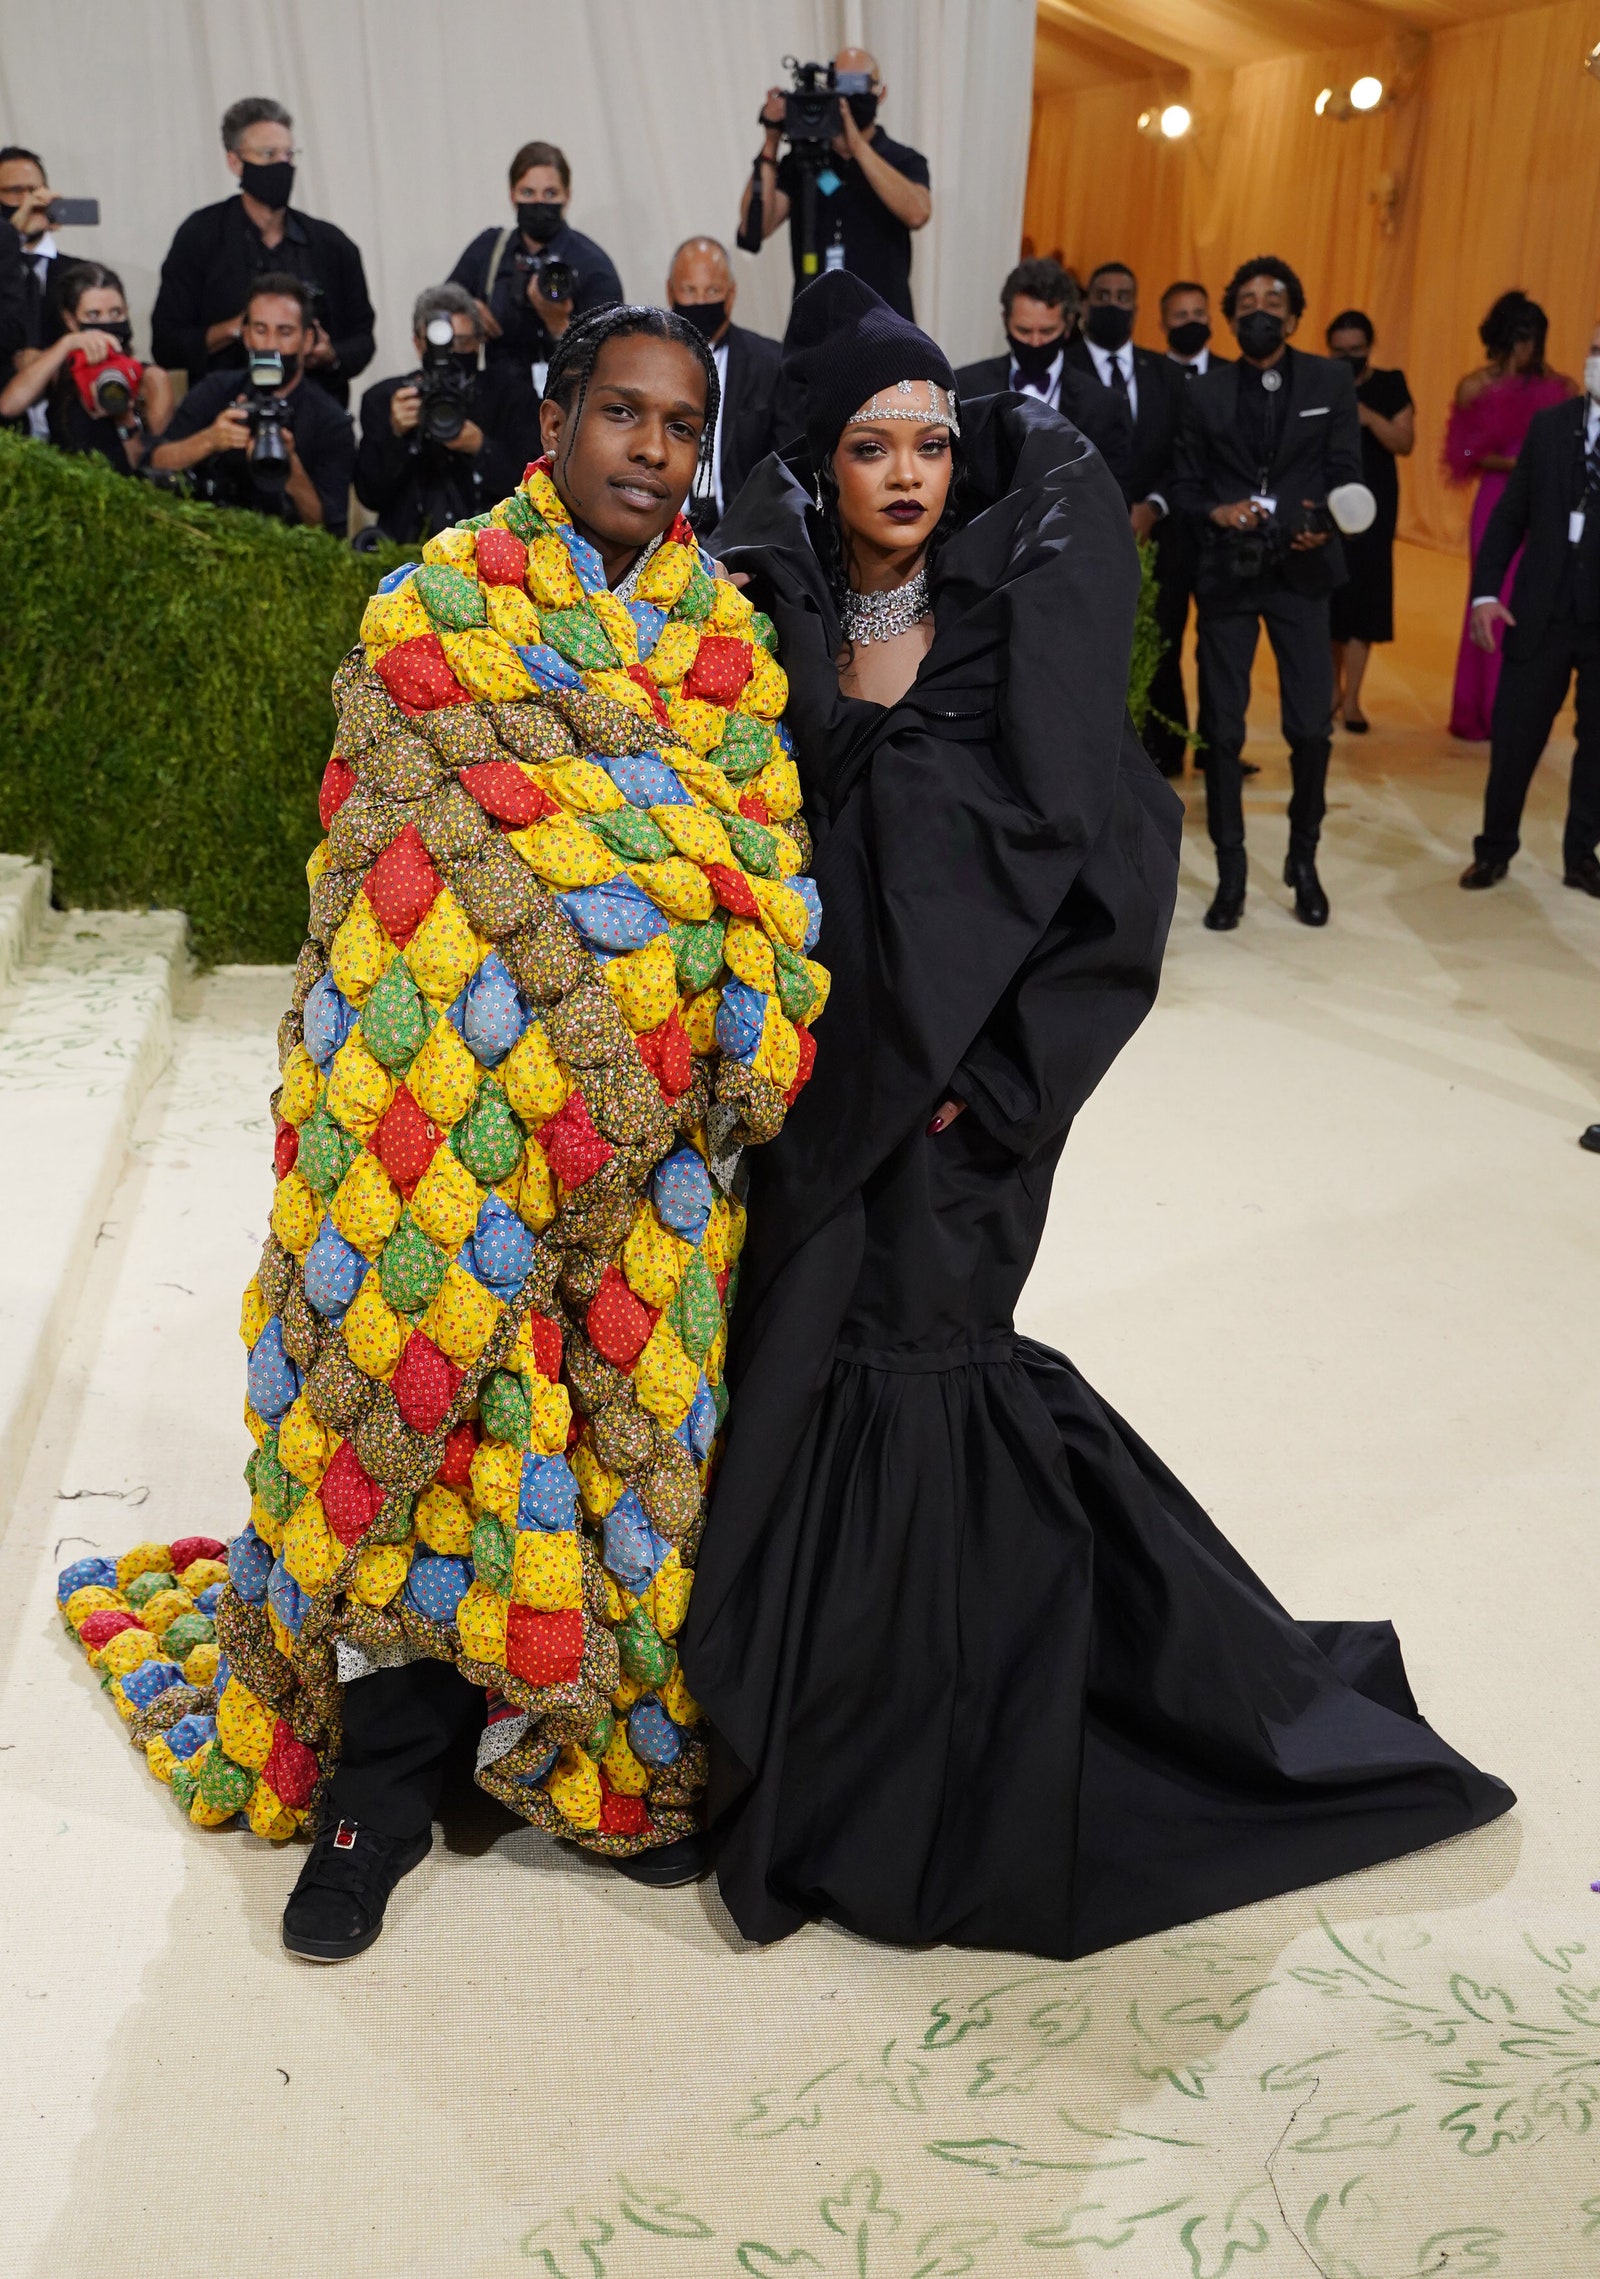 10 Looks That Ruled The Red Carpet at Met Gala 2021